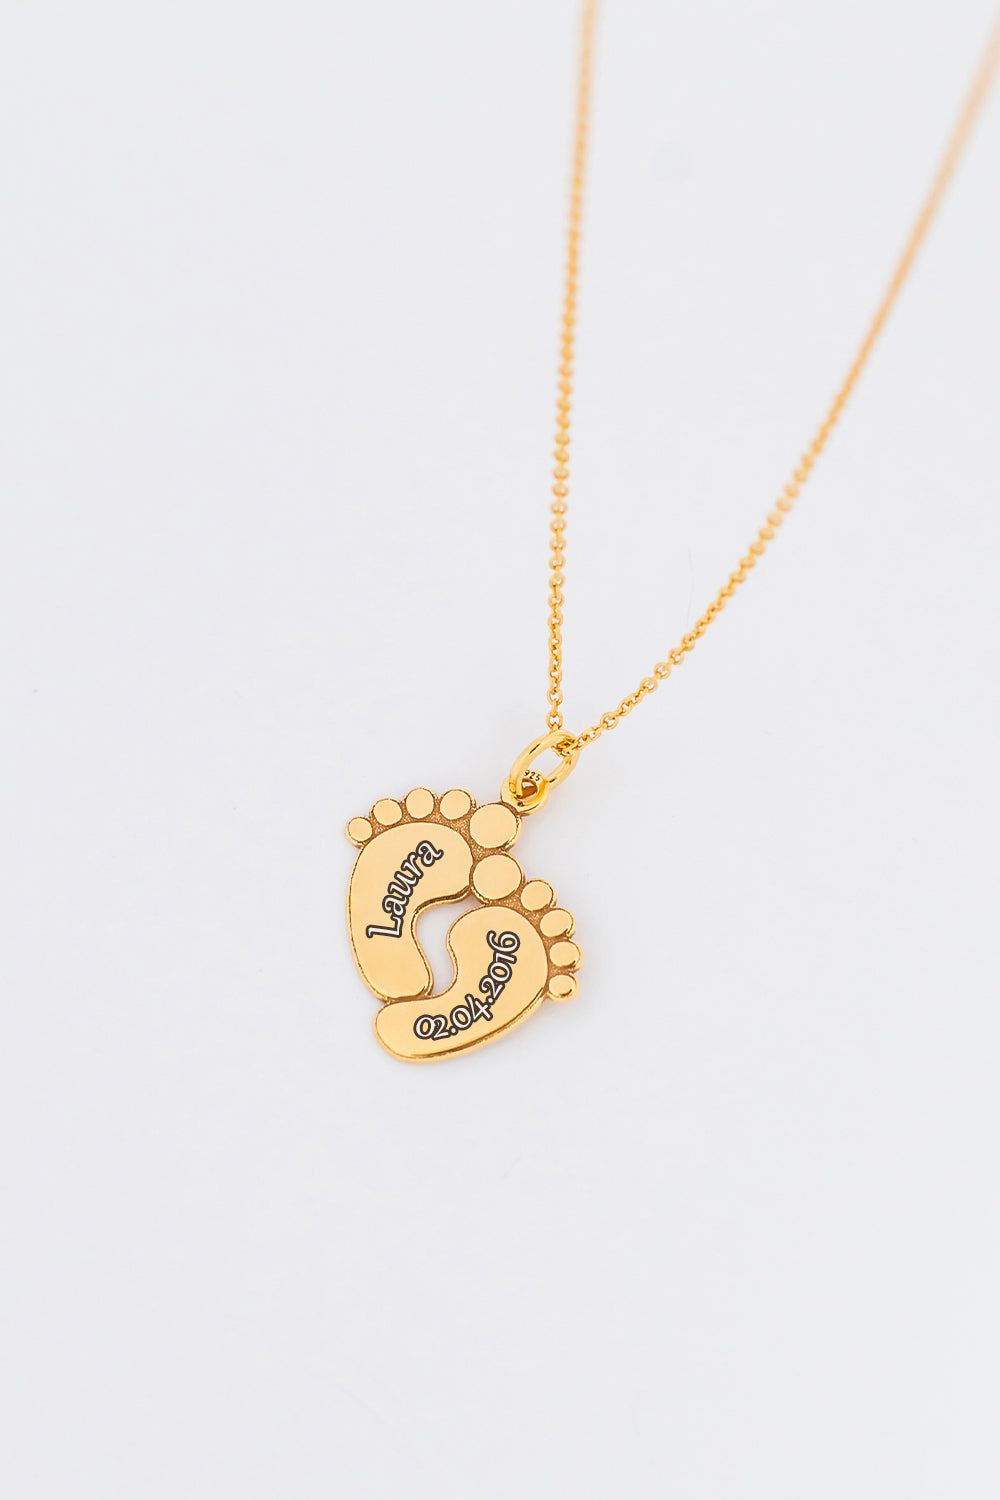 Necklace BABY FEET | NAME & DATE